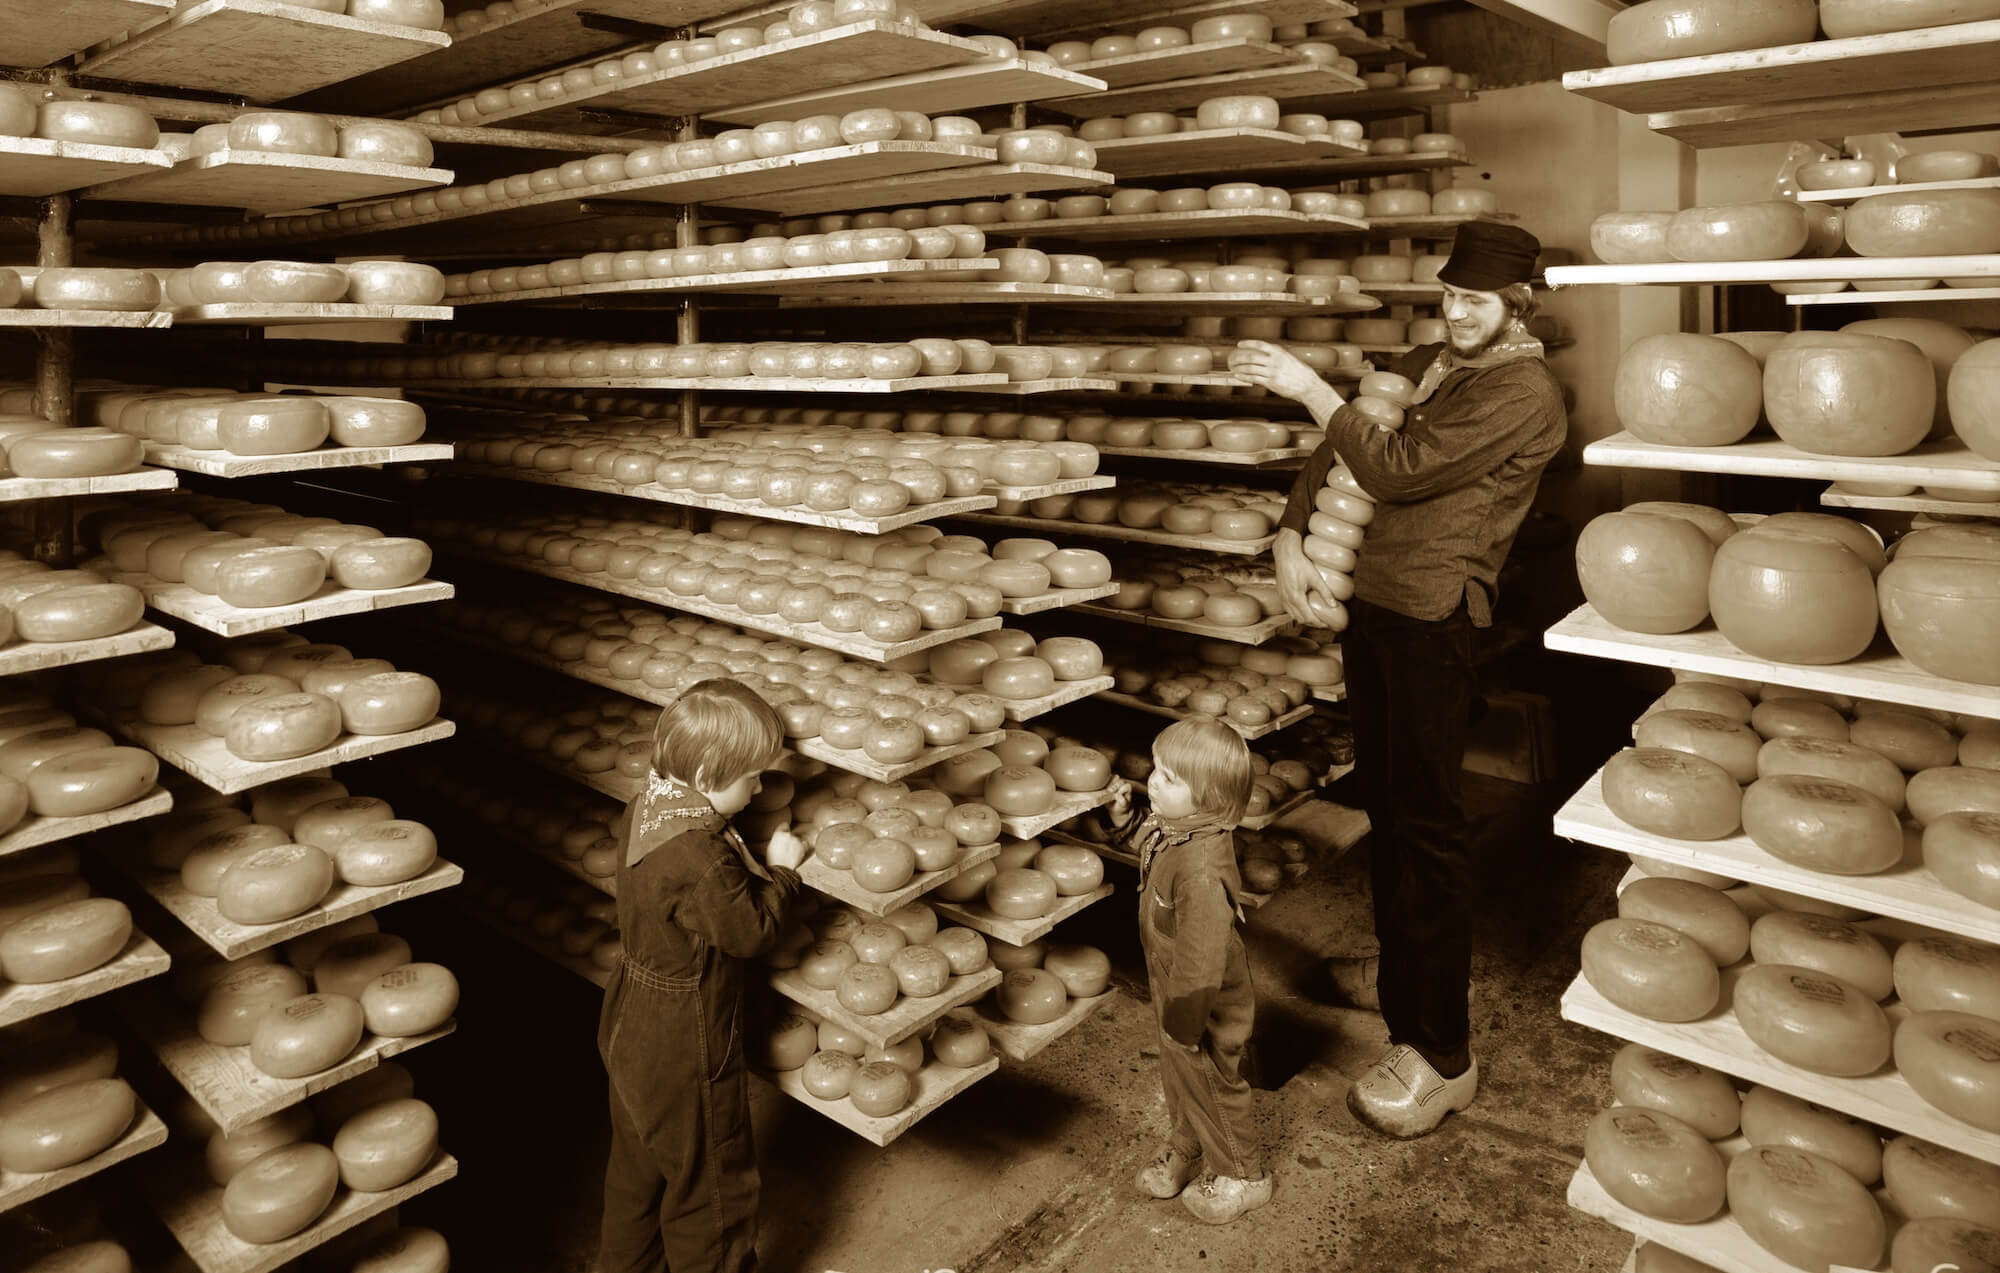 Henri Willig: Artisanal Cheese in the Age of Automation